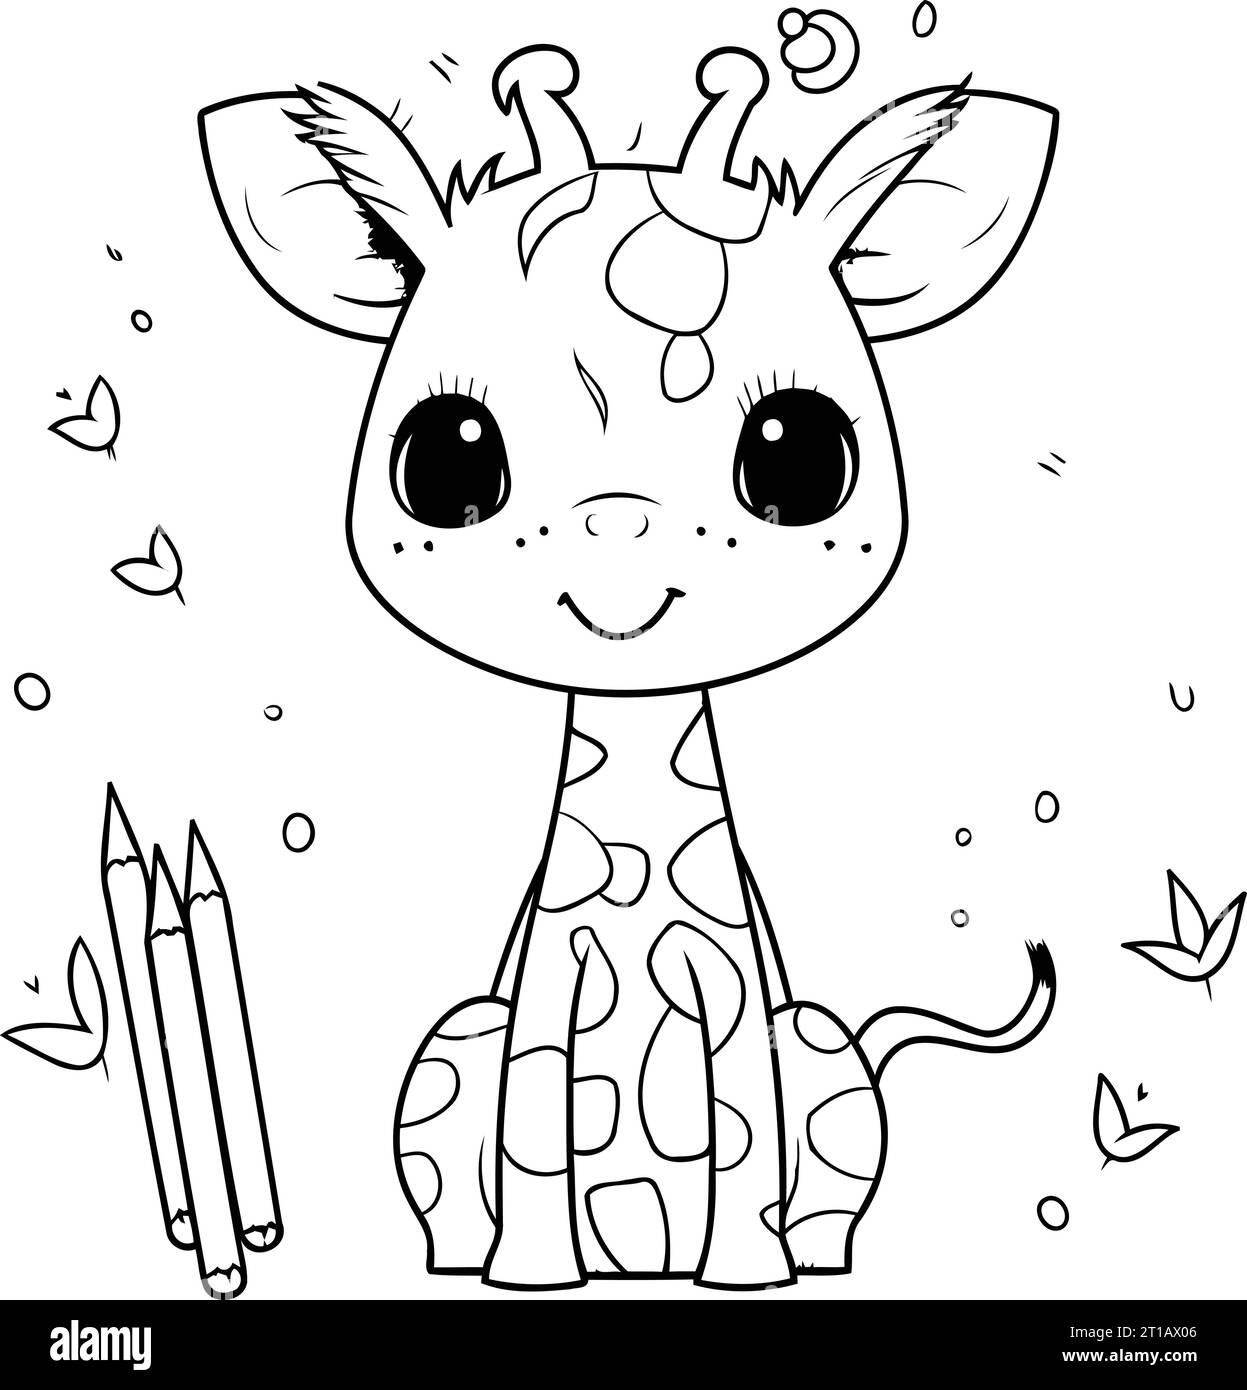 Coloring book for children. cute giraffe and pencils. Stock Vector